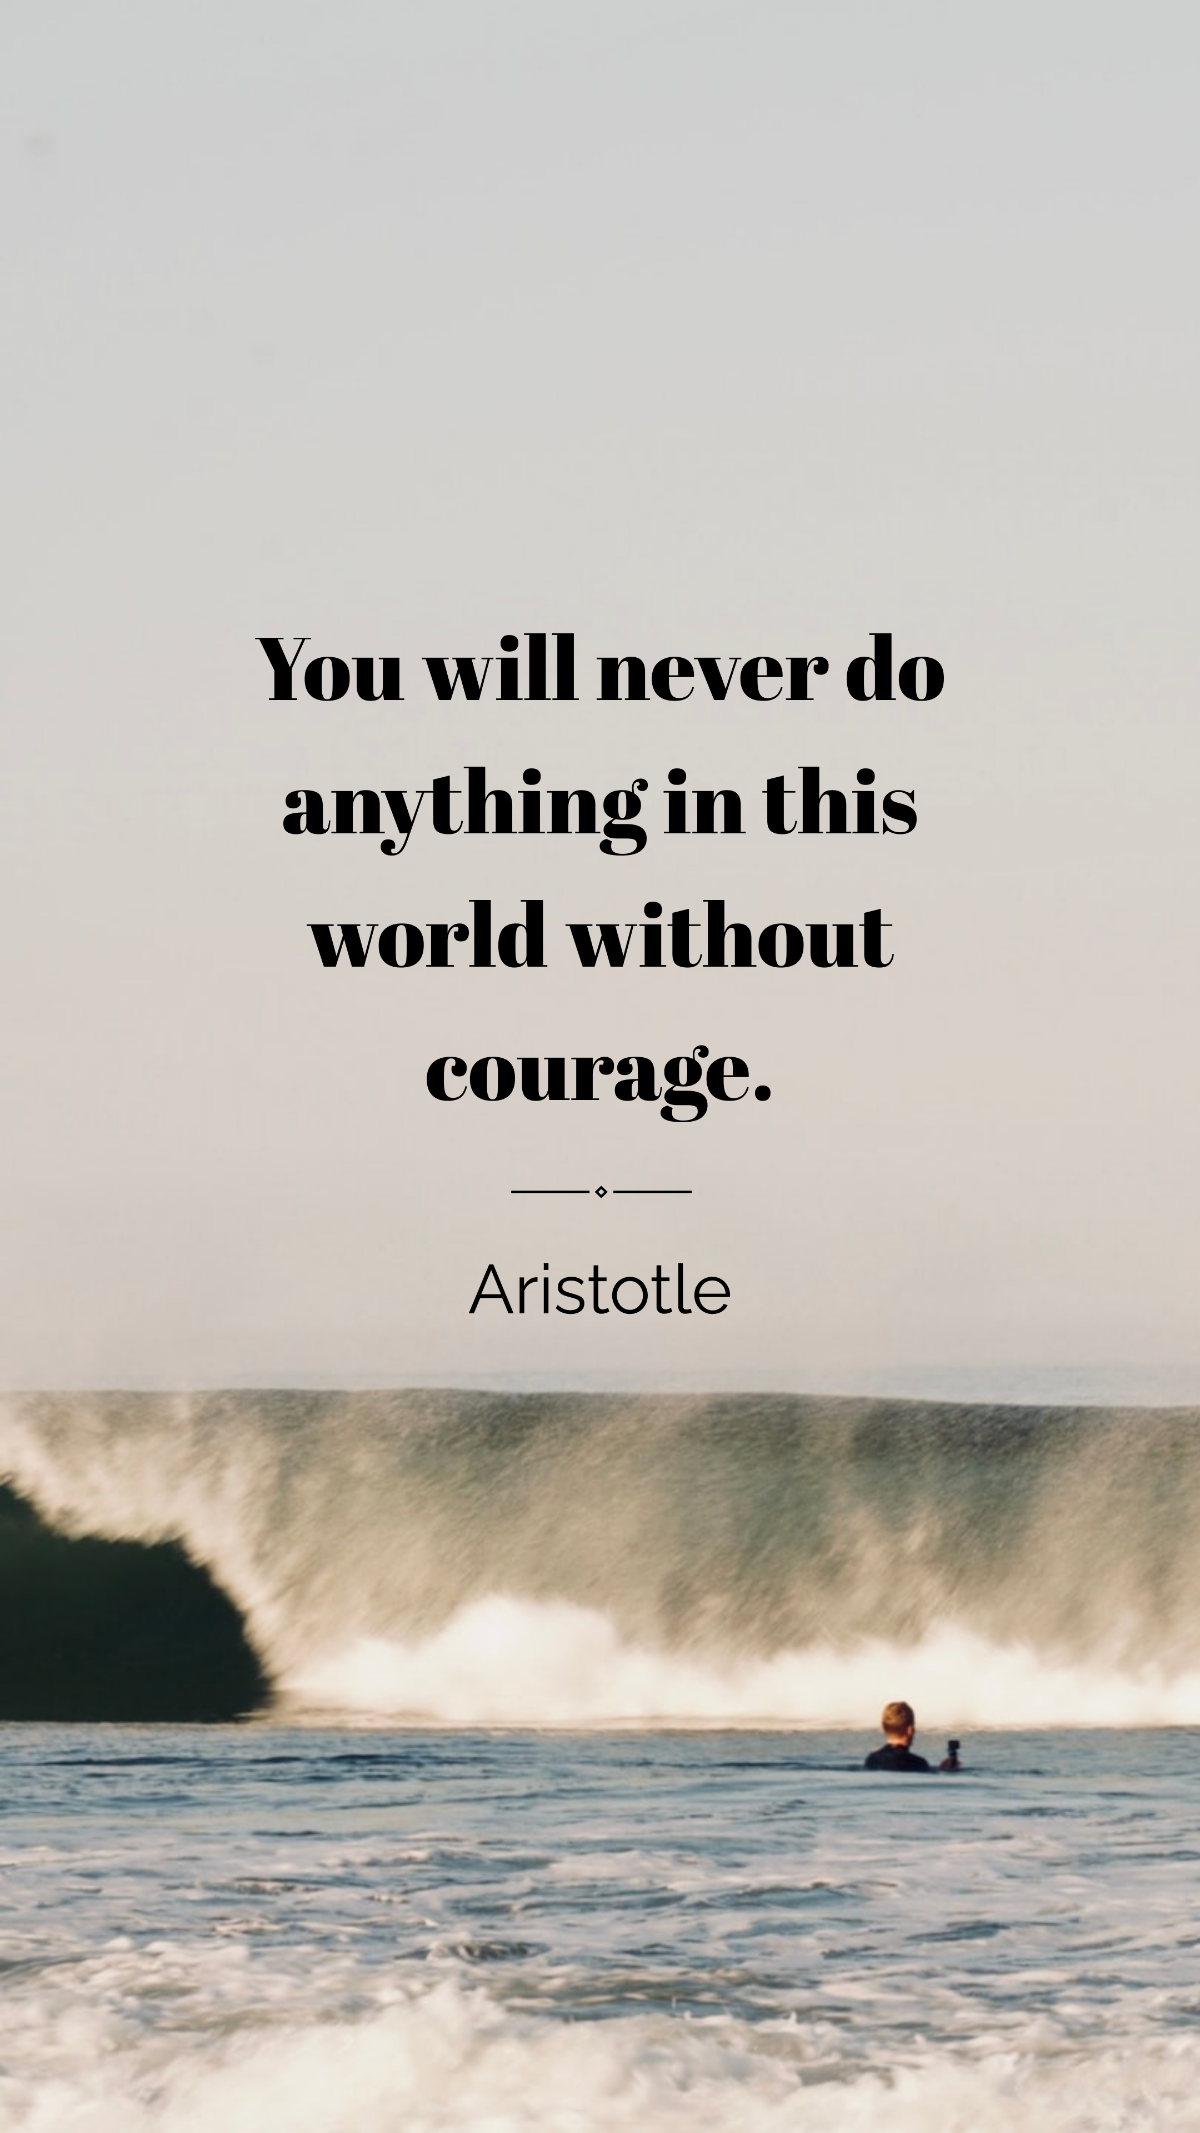 Free Aristotle - You will never do anything in this world without courage. Template